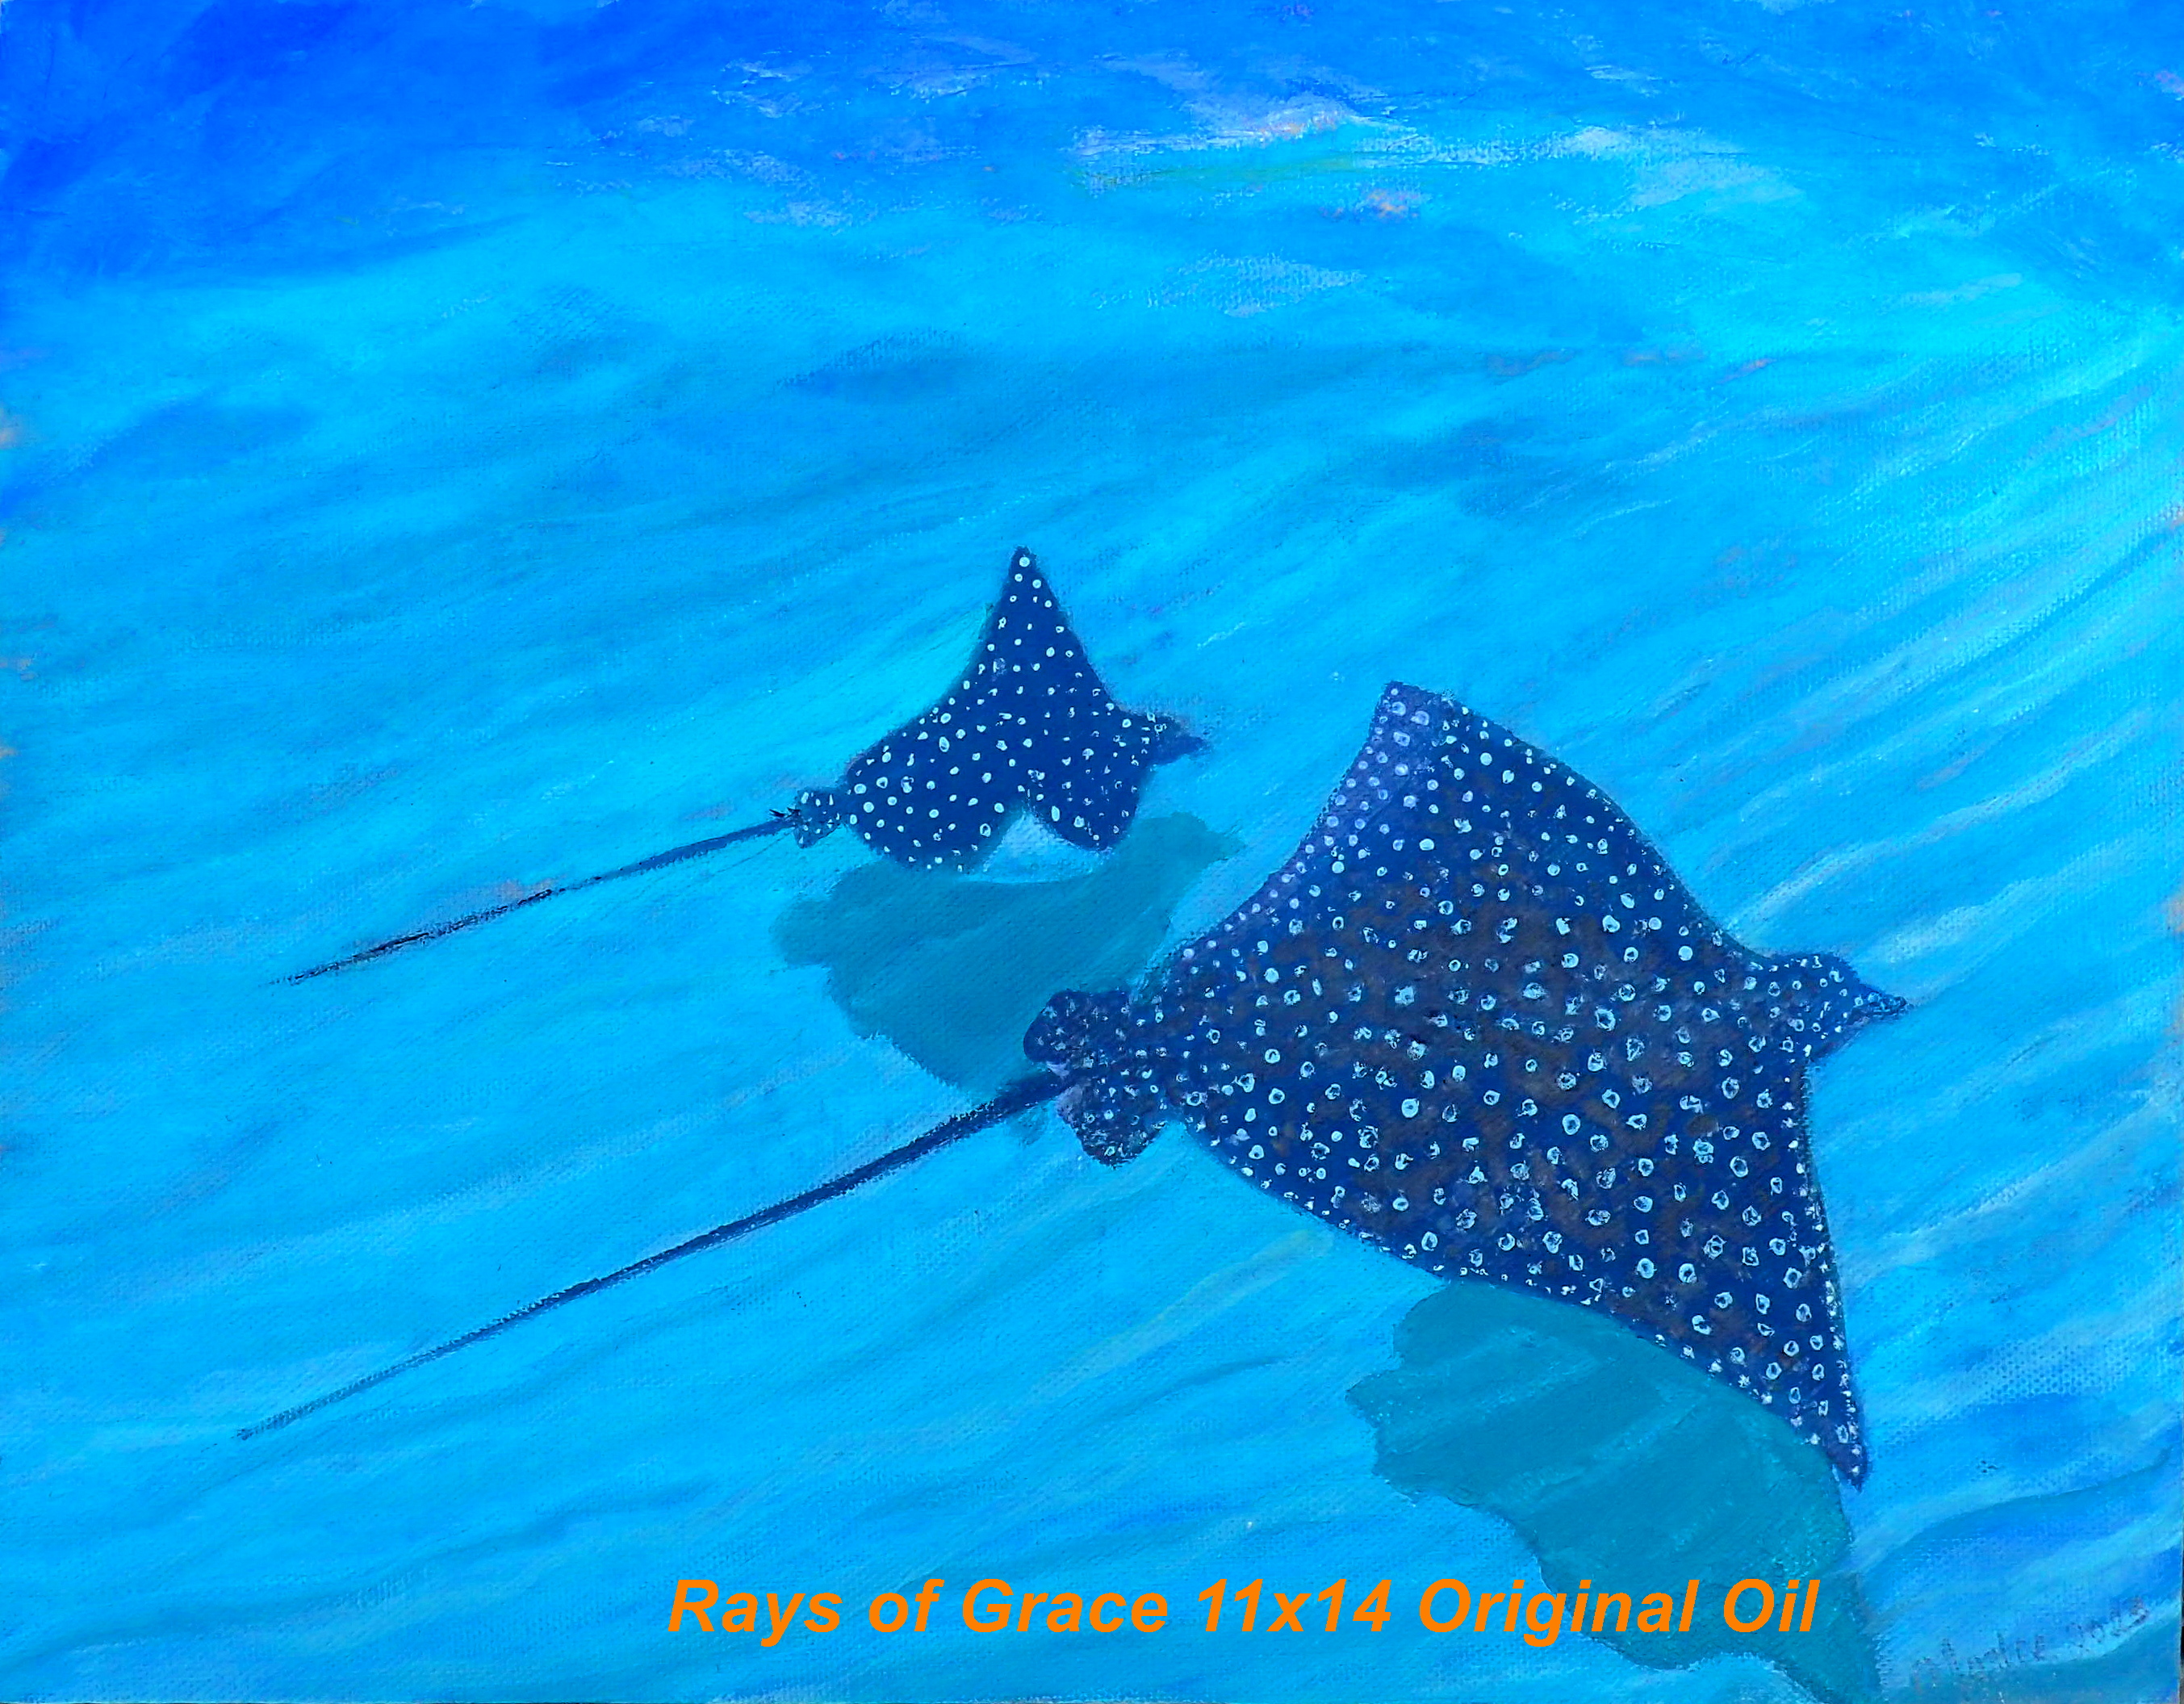 11x14 Original Oil on Wood Backed Canvas       The Eagle Ray glides with grace along the sandy bottom next to Sandy Cay Reef in Abaco.  I always feel my spirit is being carried with Grace when I meet 